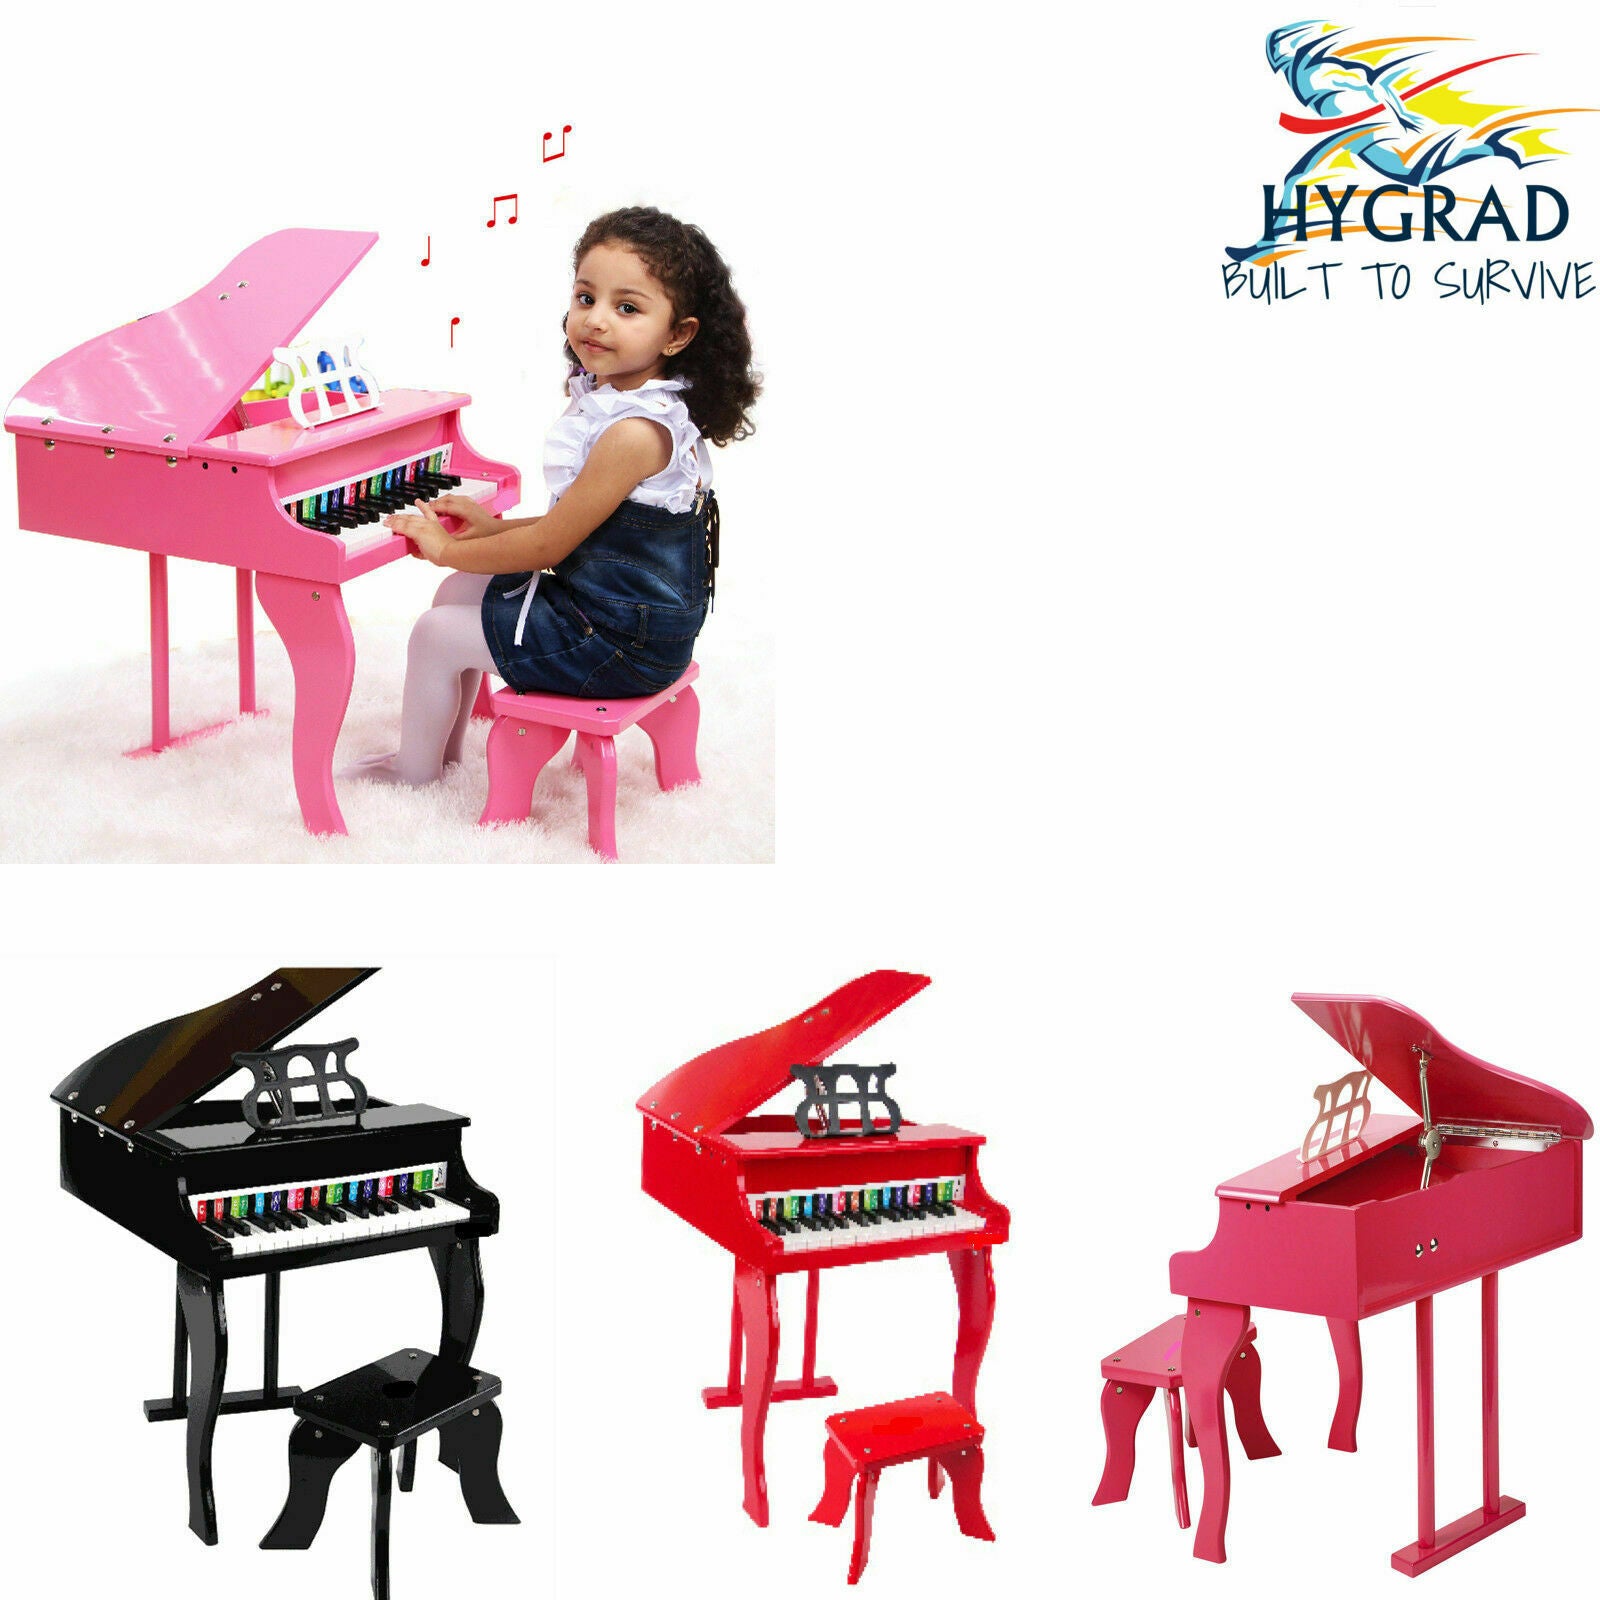 HYGRAD Educational Children's 30 key Kids Toy Grand Baby Wooden Piano with Bench